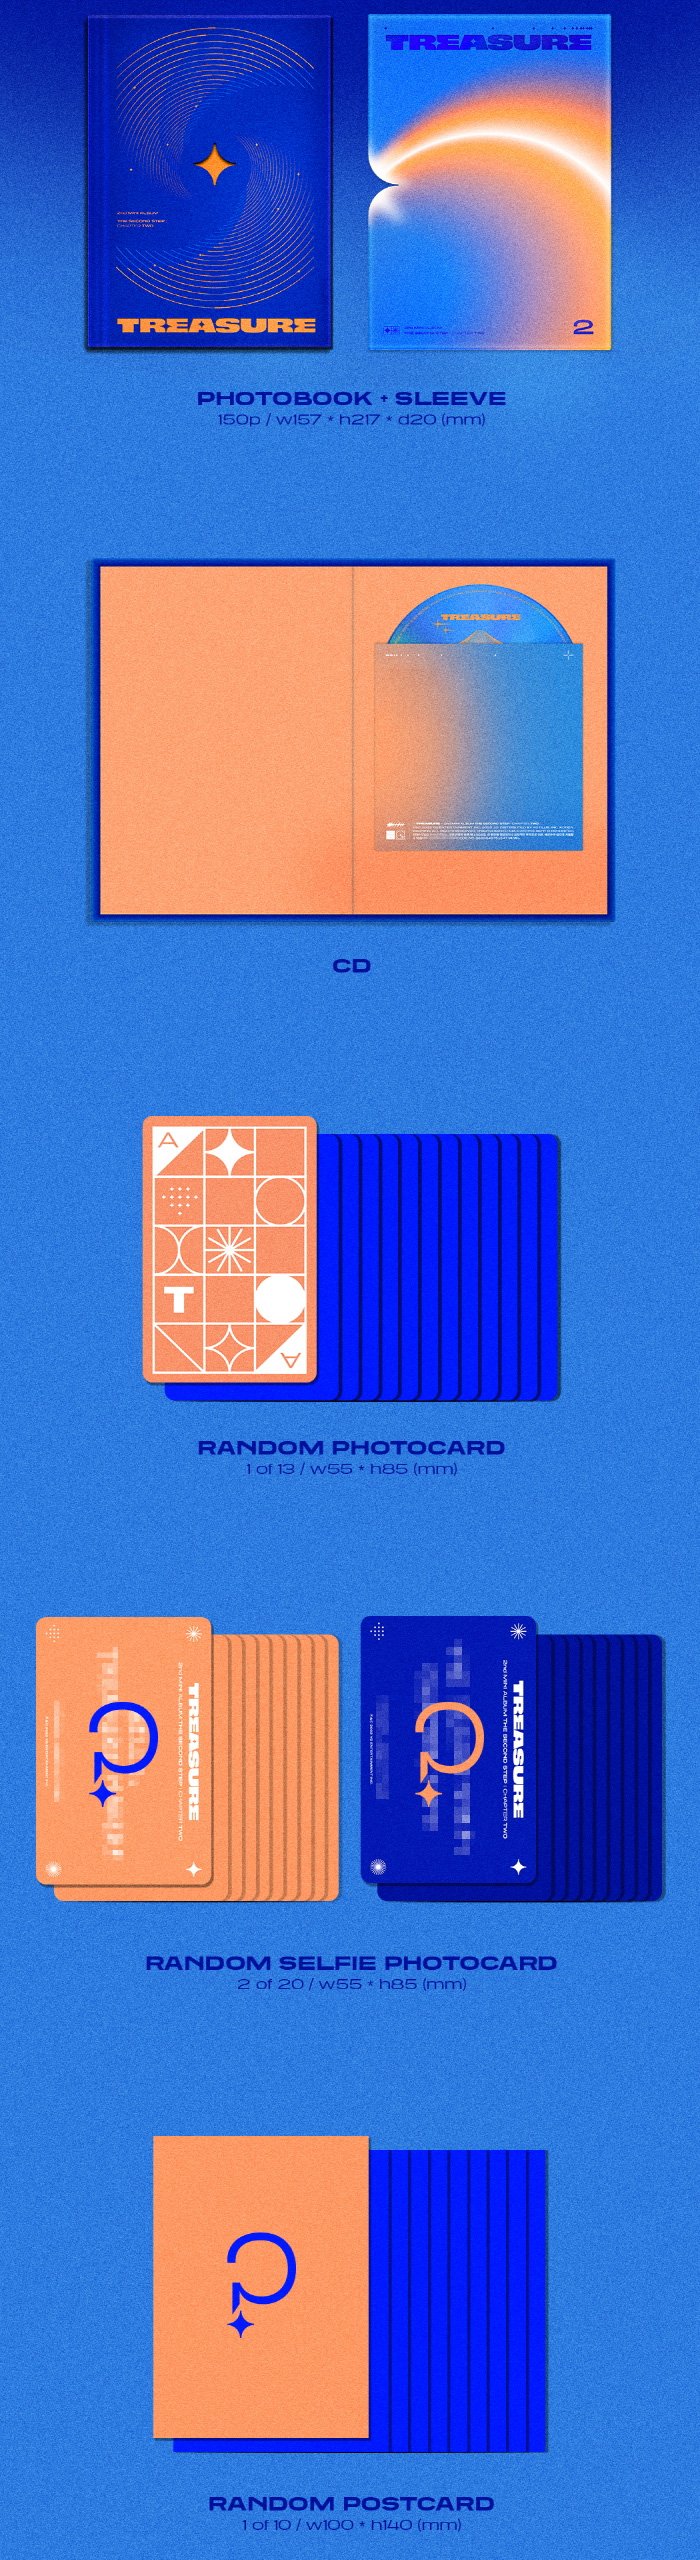 TREASURE - 2nd Mini-Album ‘THE SECOND STEP: CHAPTER TWO’ (Photobook Ver.)